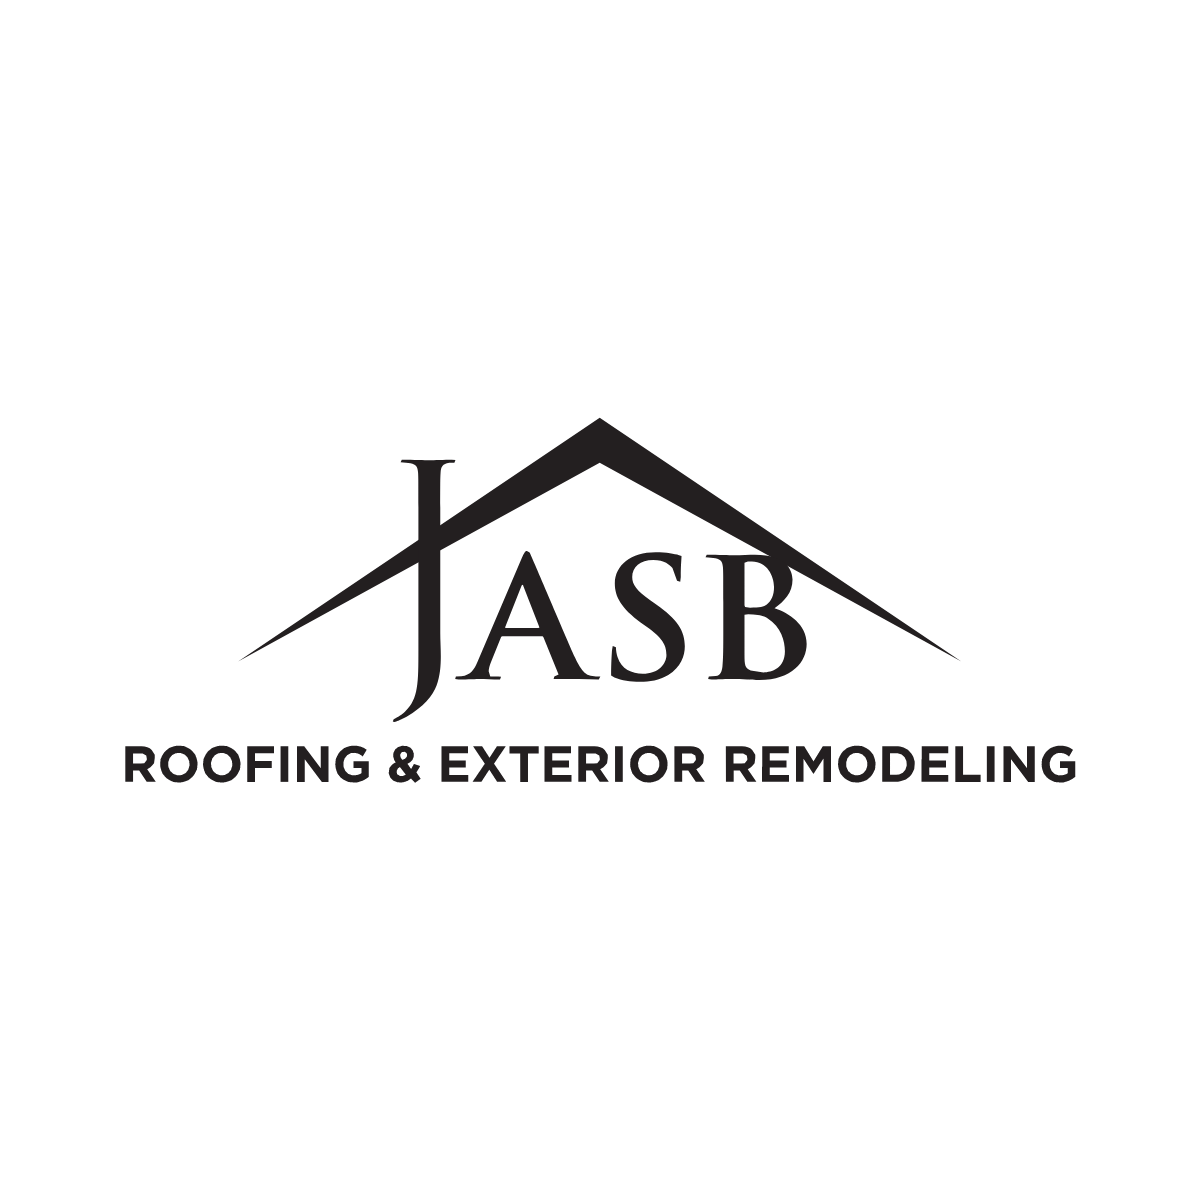 JASB Roofing & Exterior Remodeling - Austin, TX 78750 - (512)961-1421 | ShowMeLocal.com